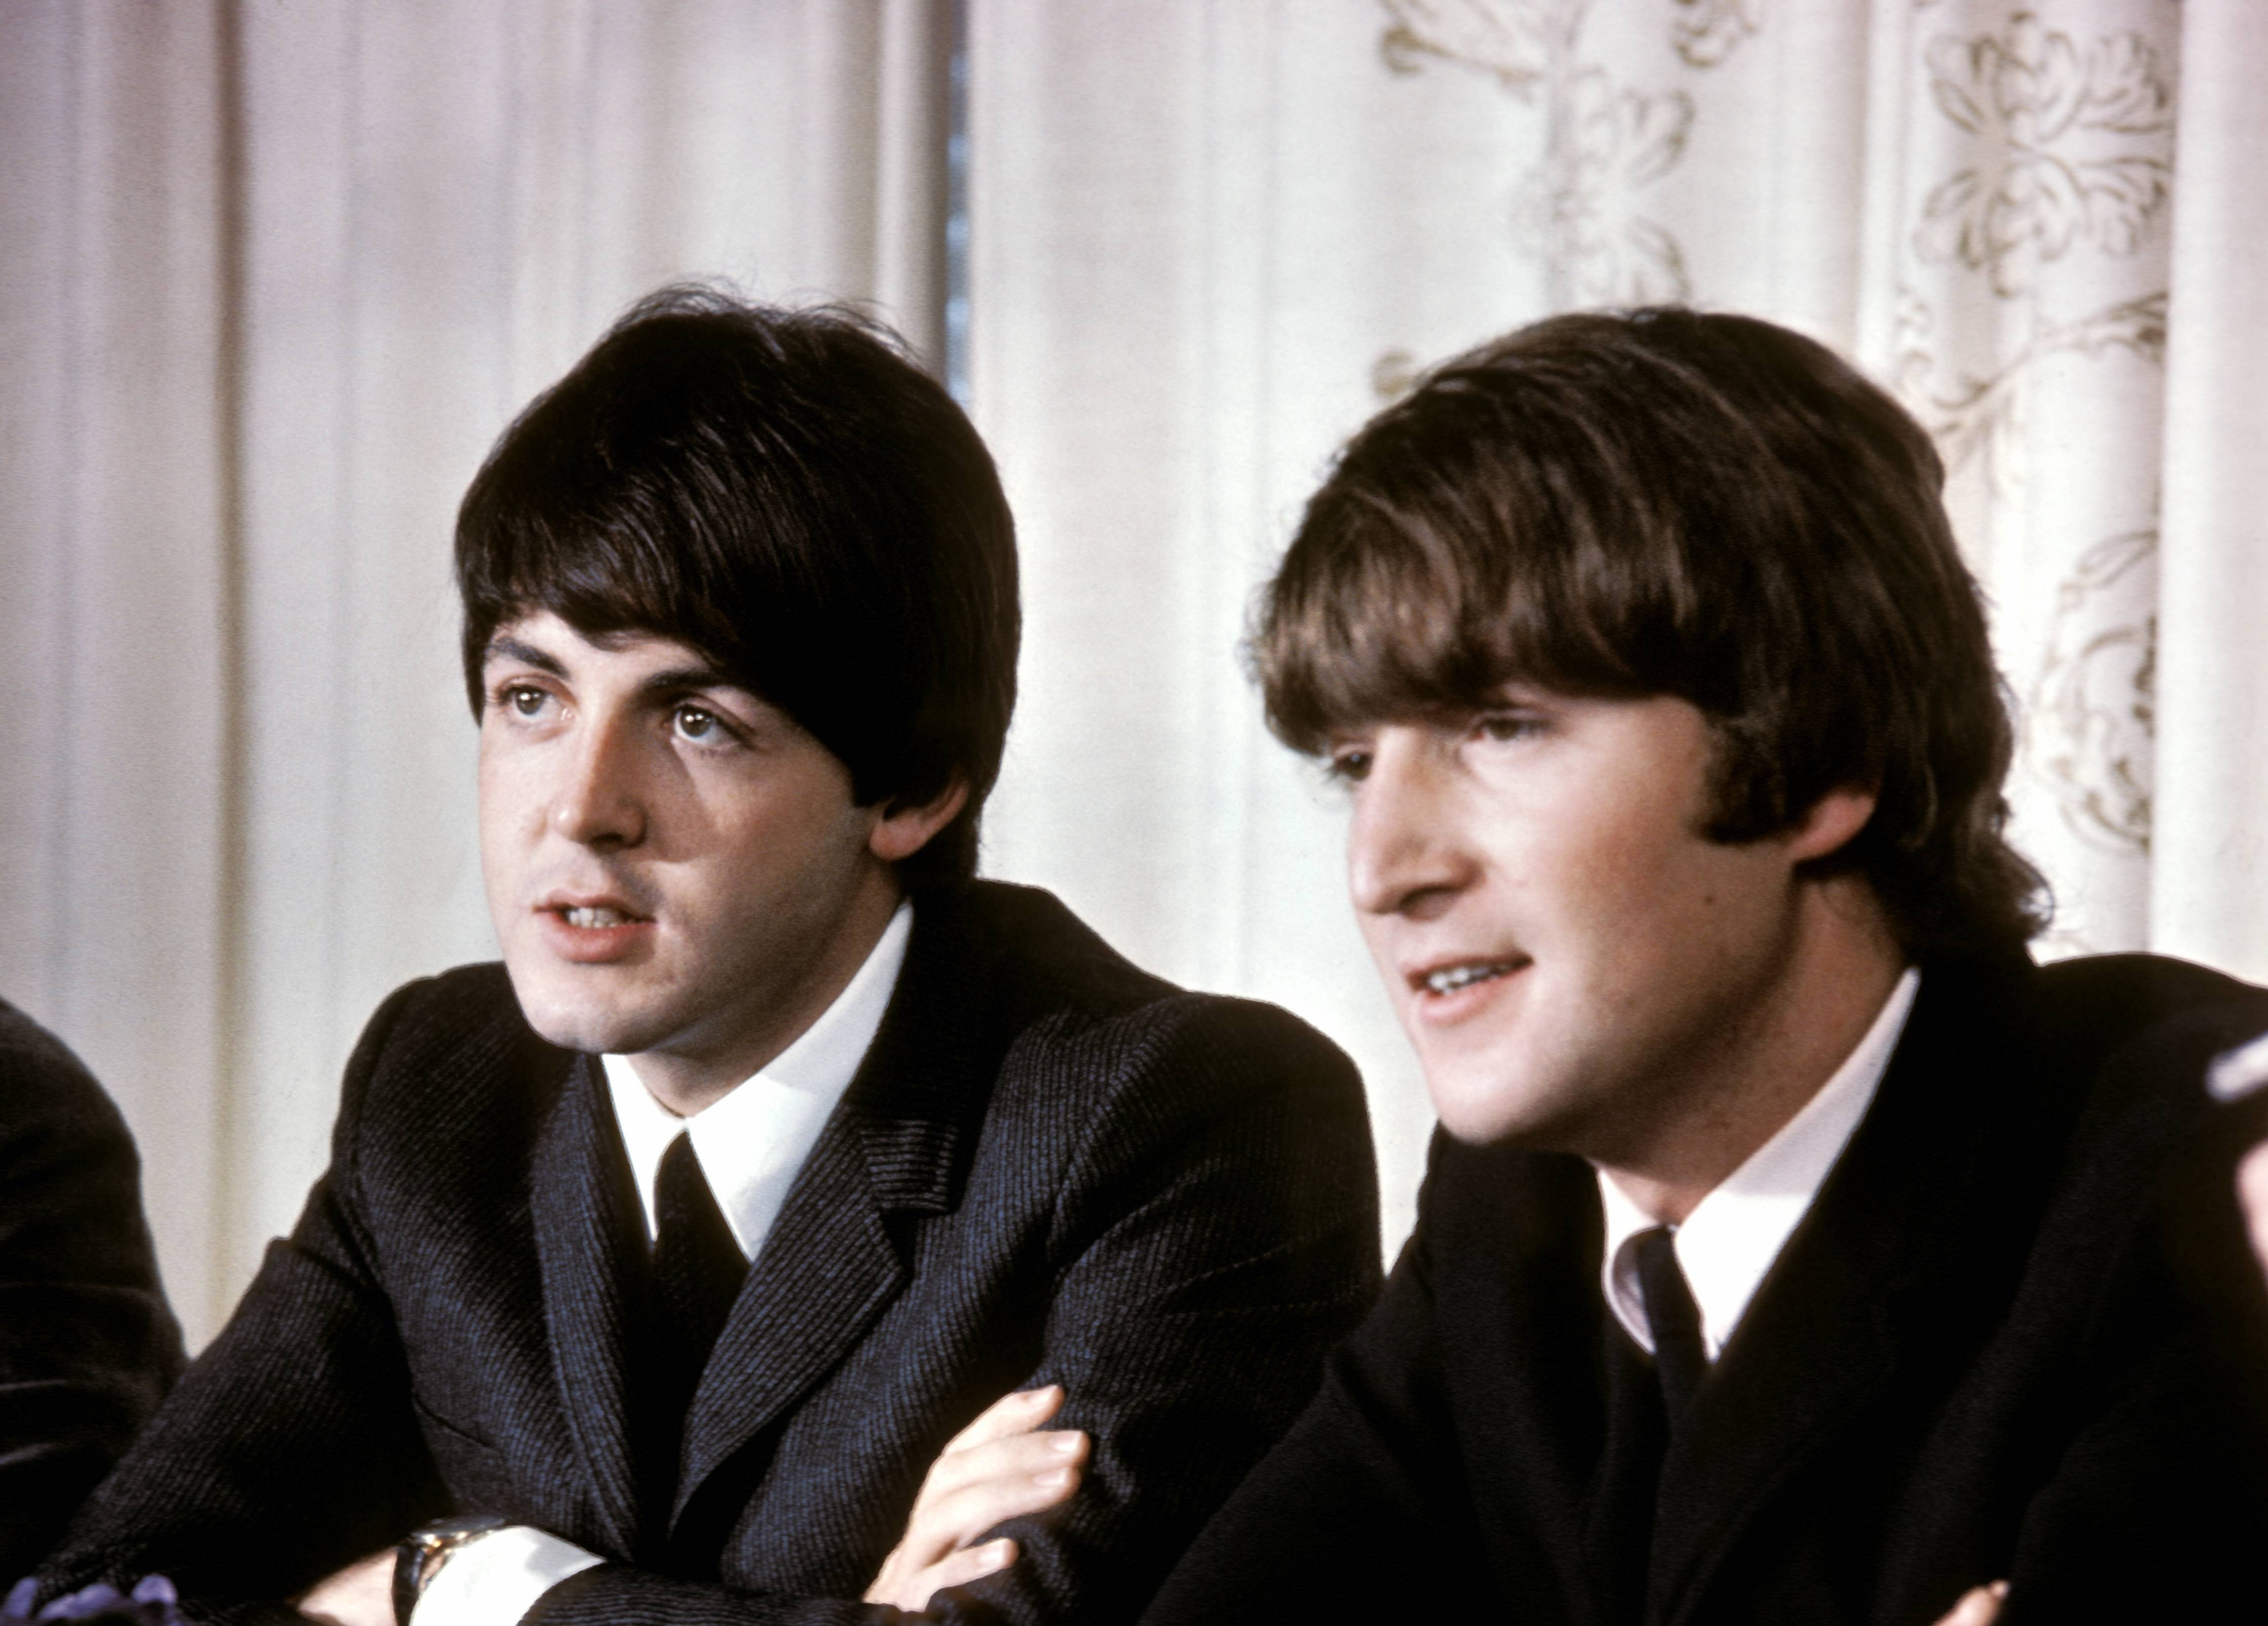 Paul McCartney and John Lennon of The Beatles at a press conference